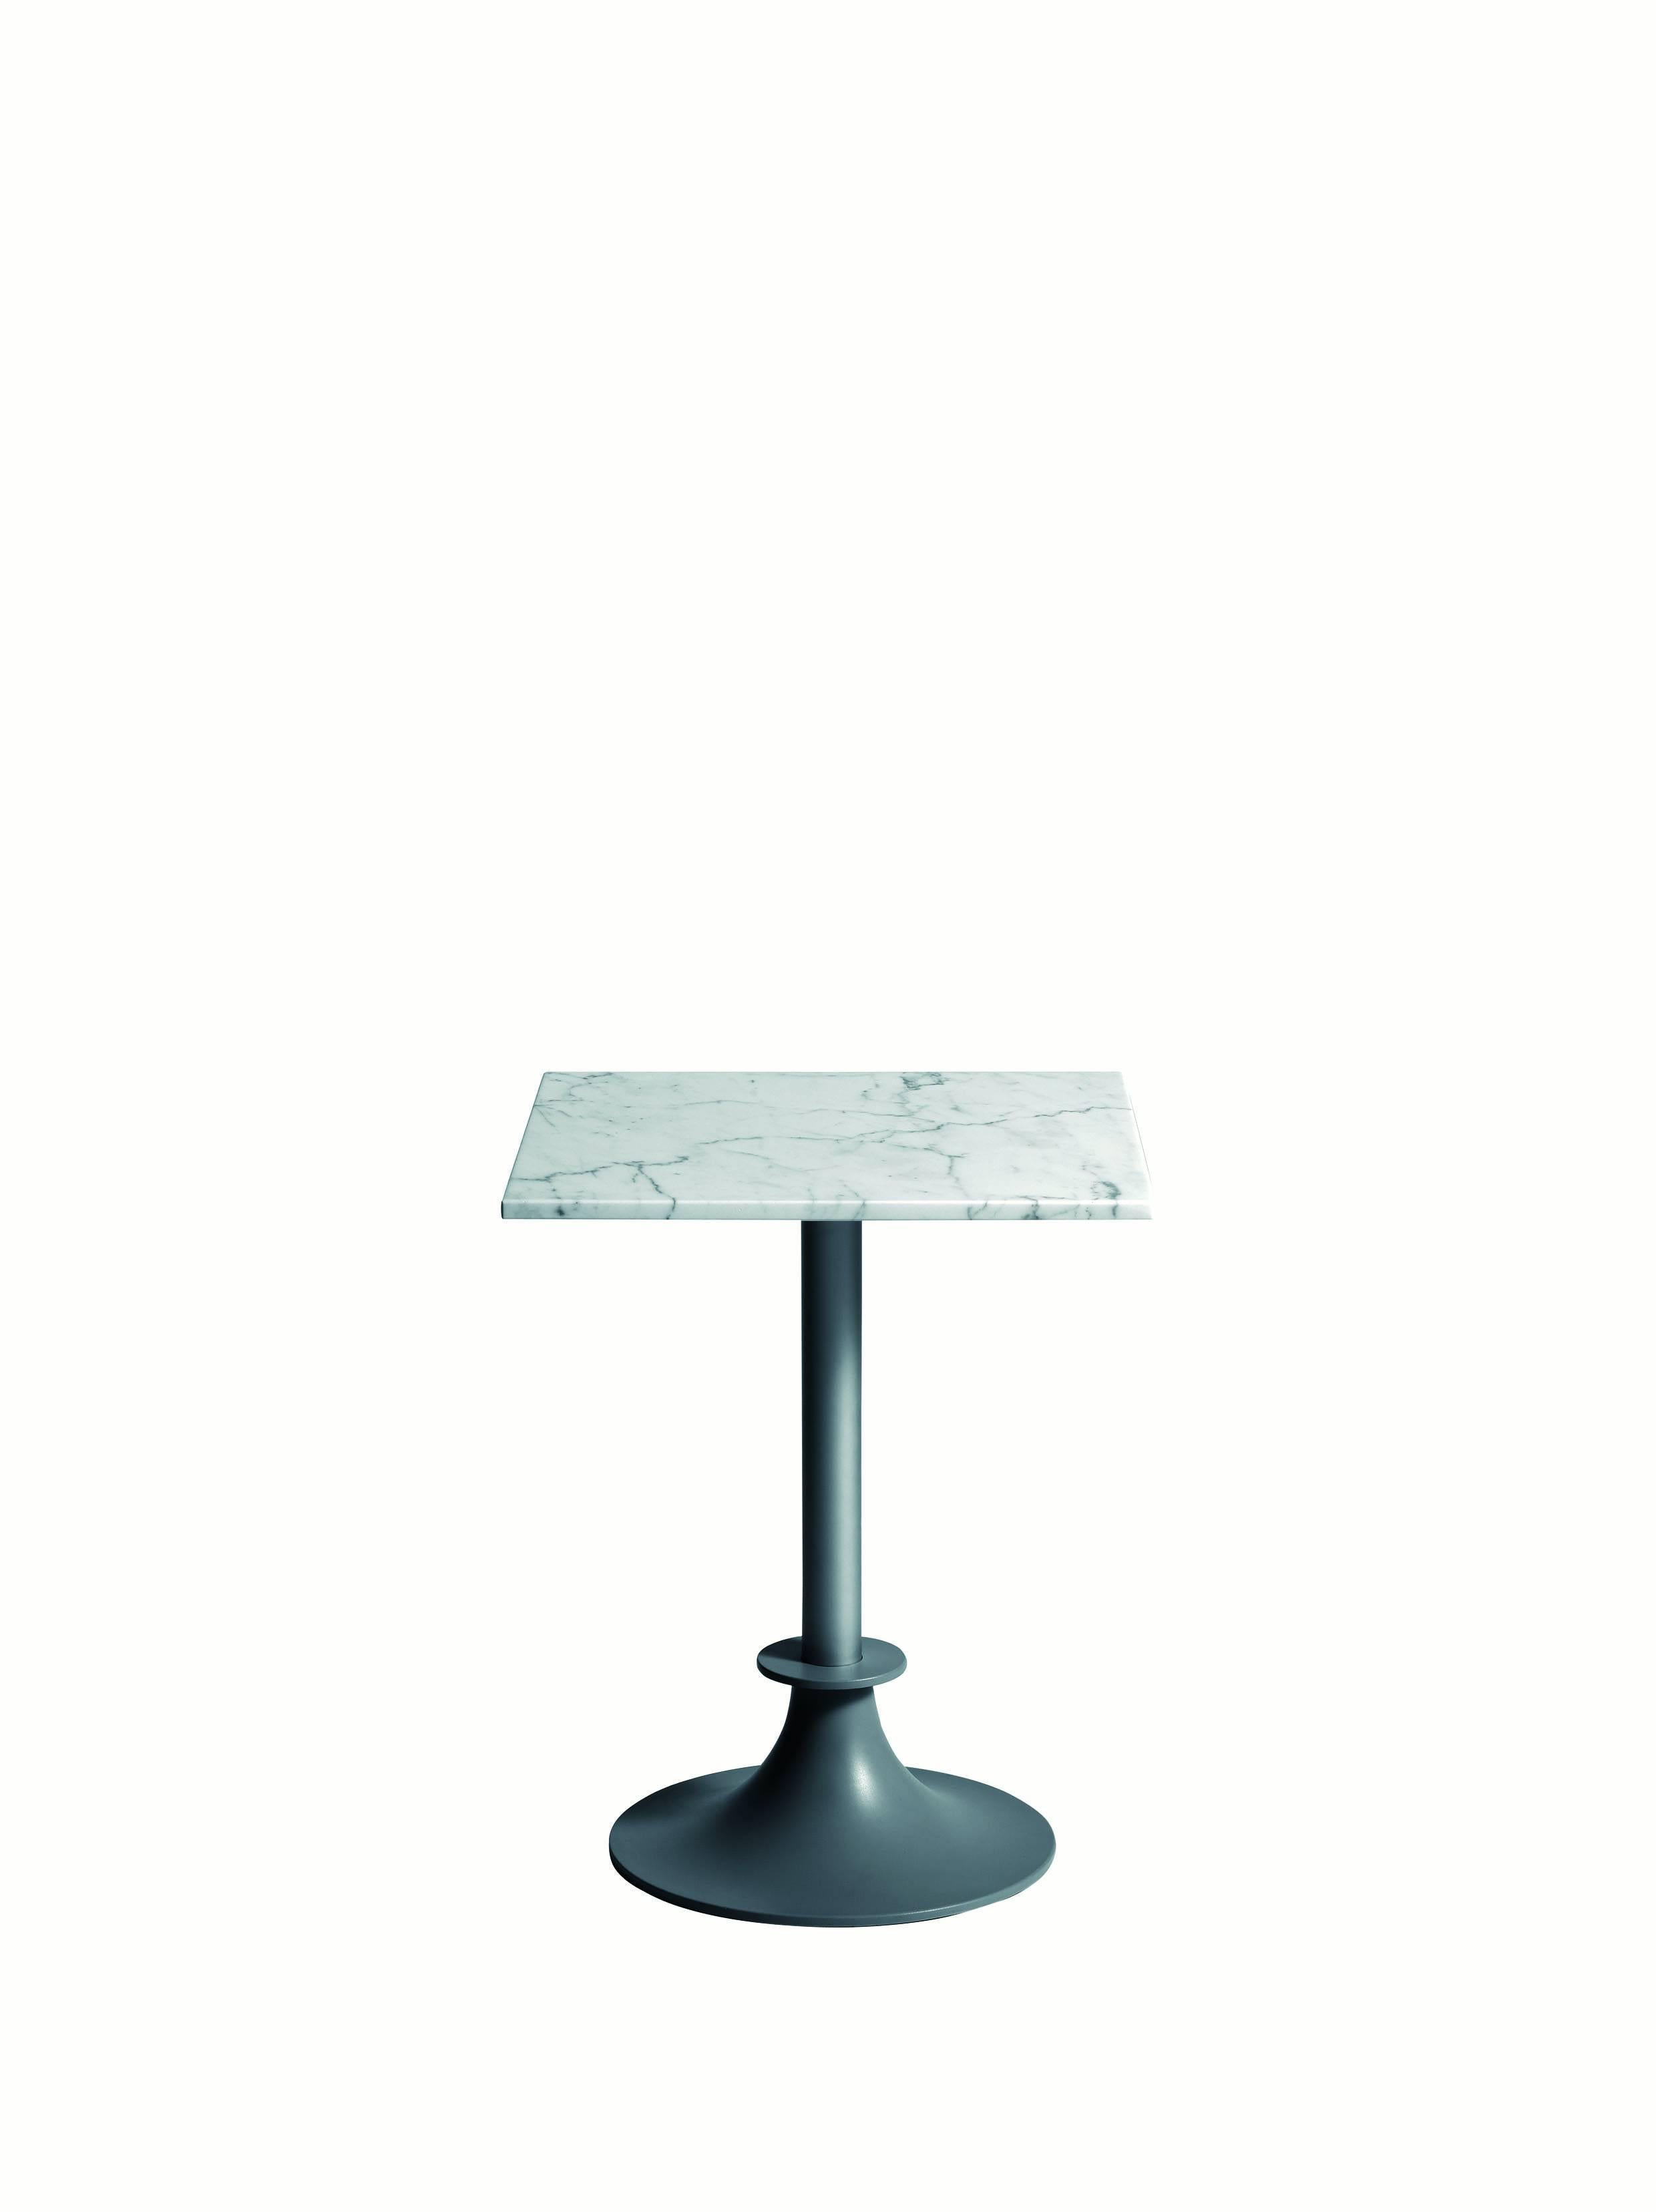 Contemporary Lord YI Tables by Philippe Starck, Available in Black or White Marble Top For Sale